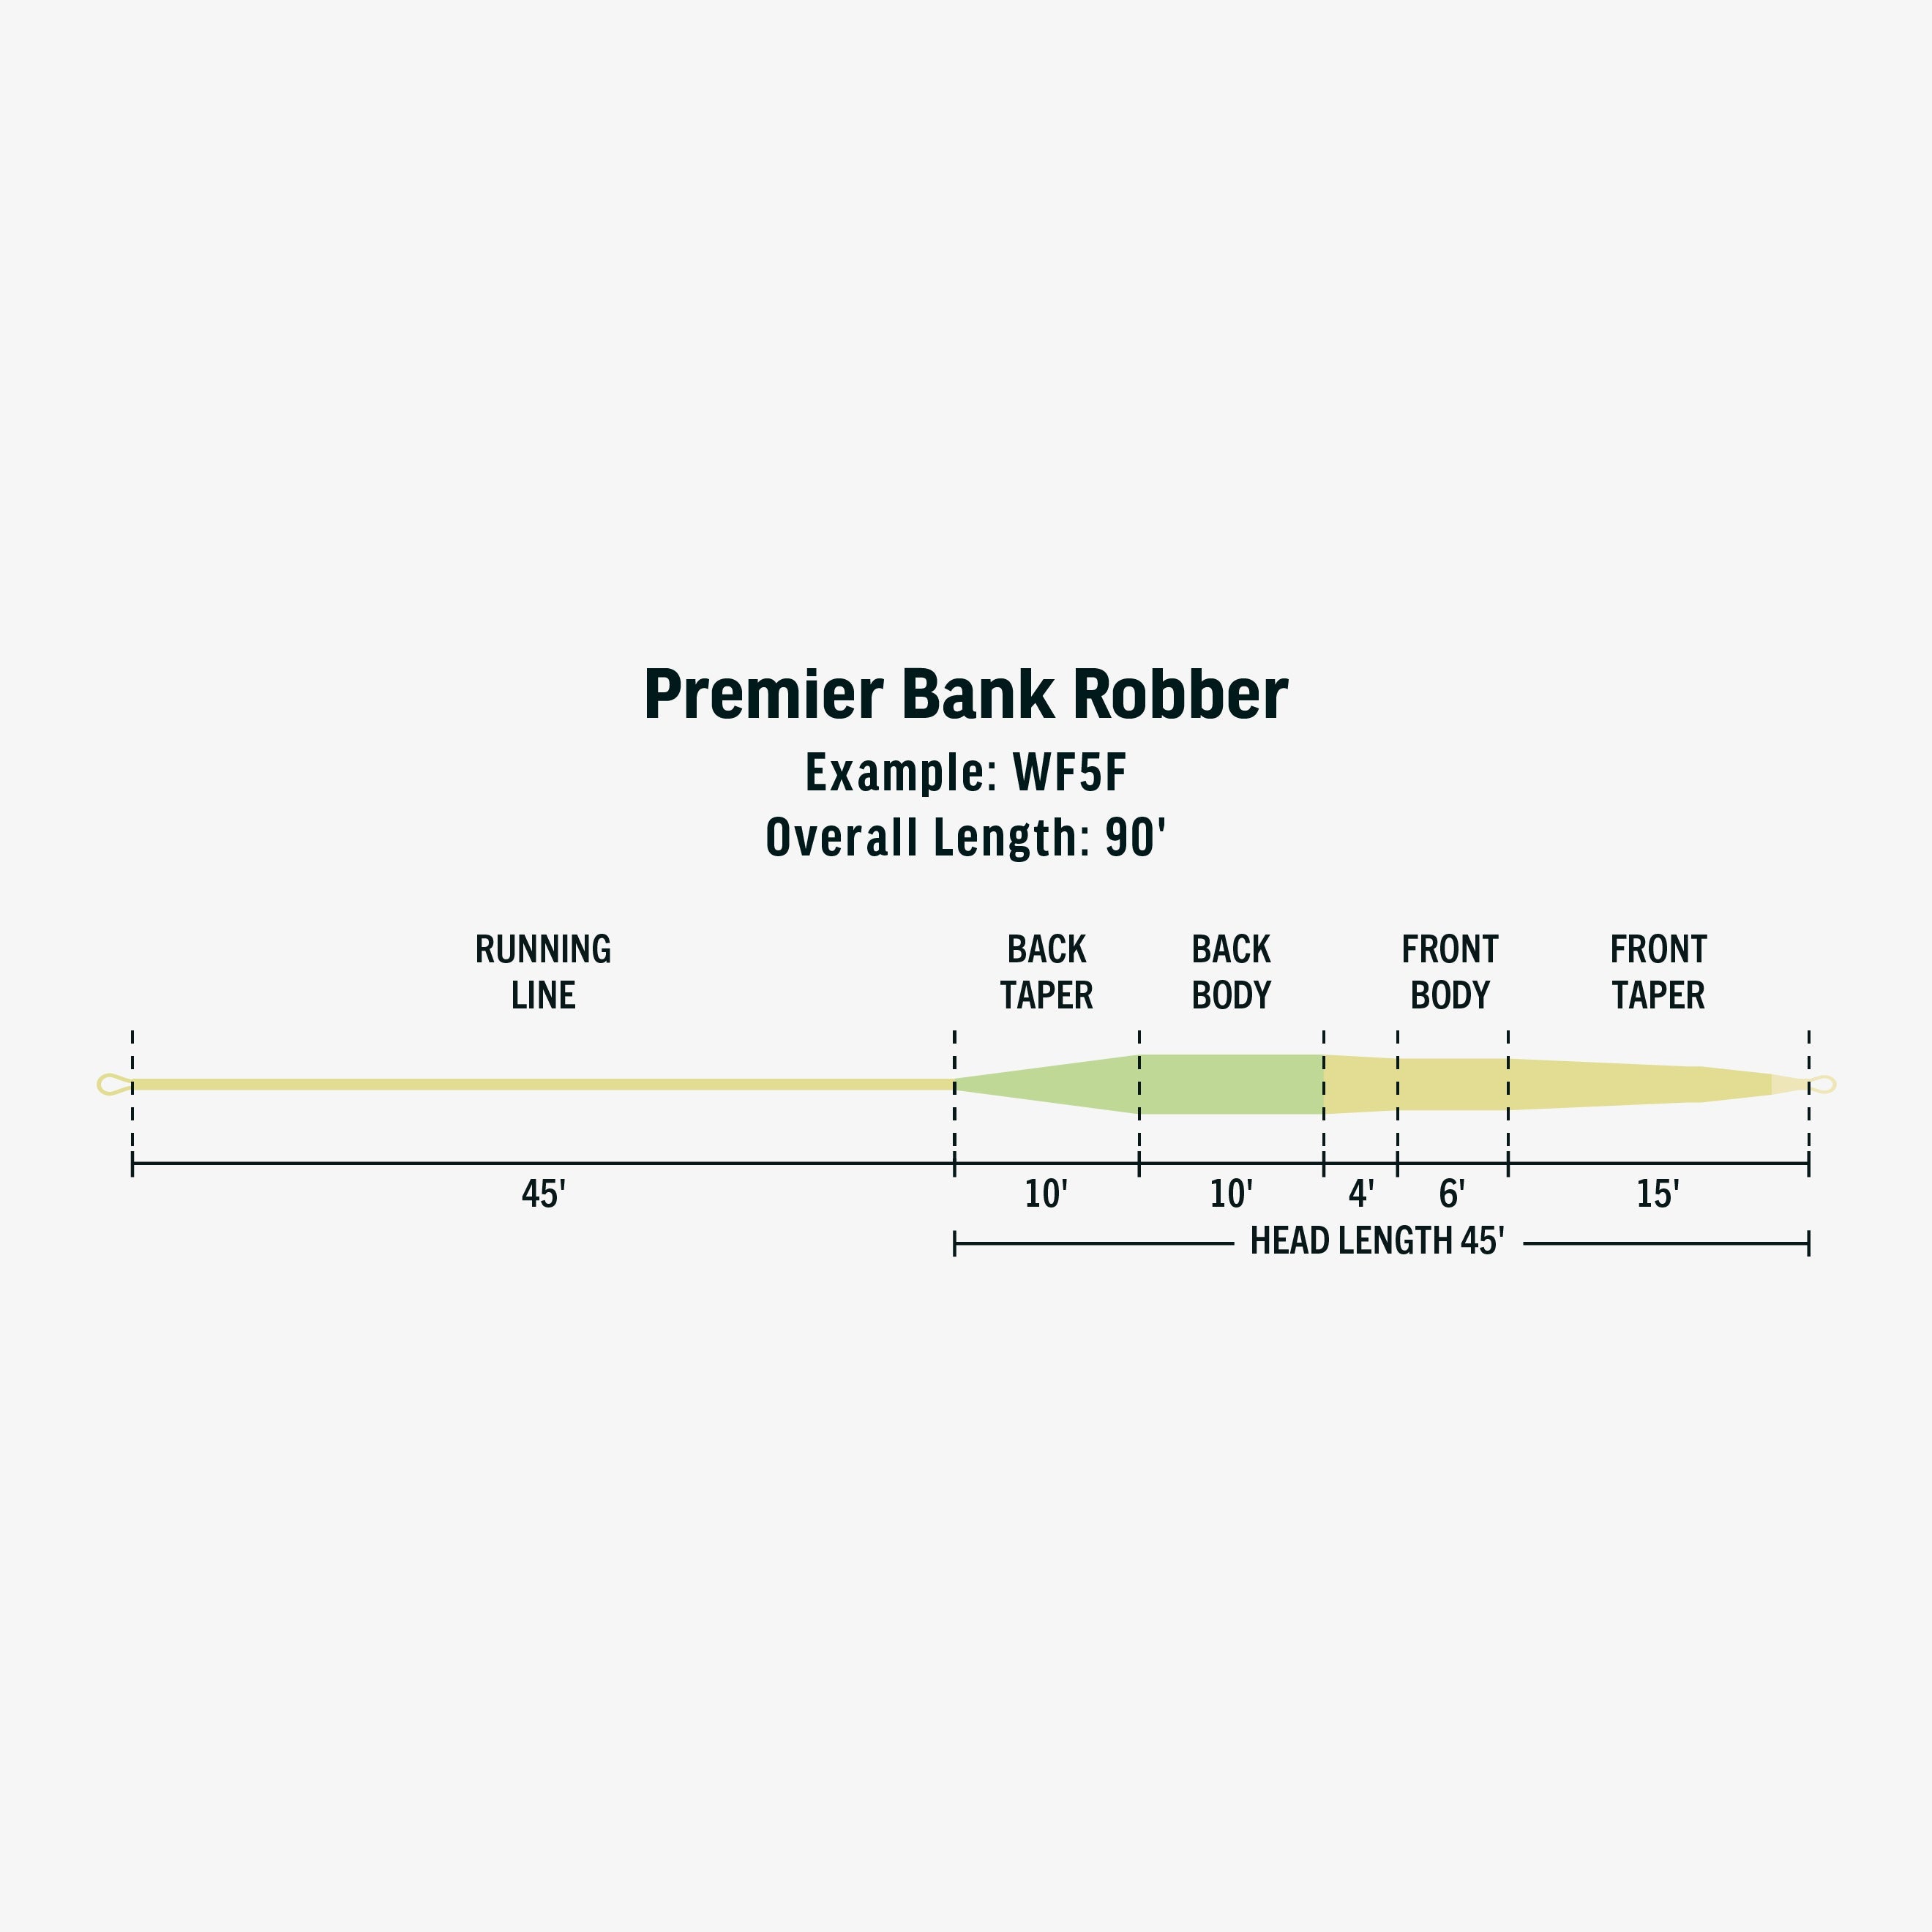 Premier Bank Robber - ( RIO PRODUCTS)